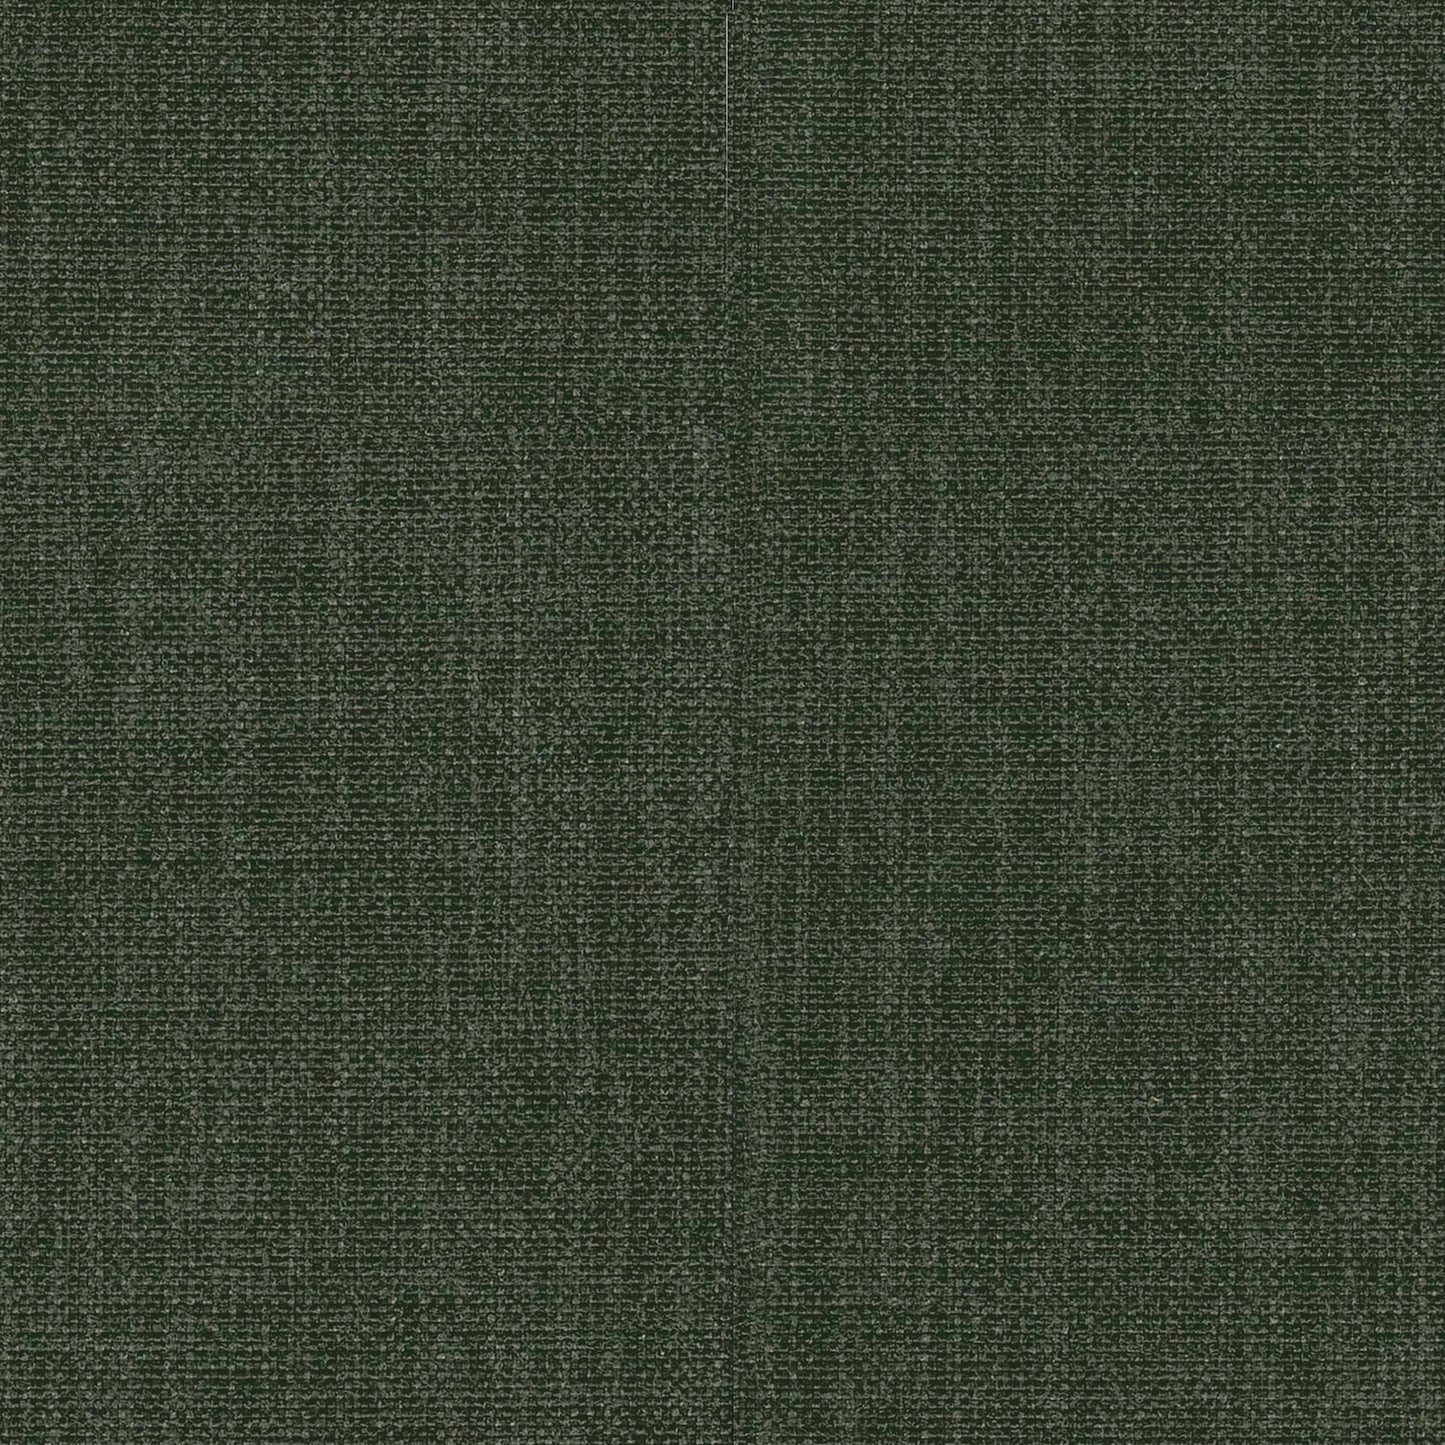 Fabric sample The Linens - Forest Green